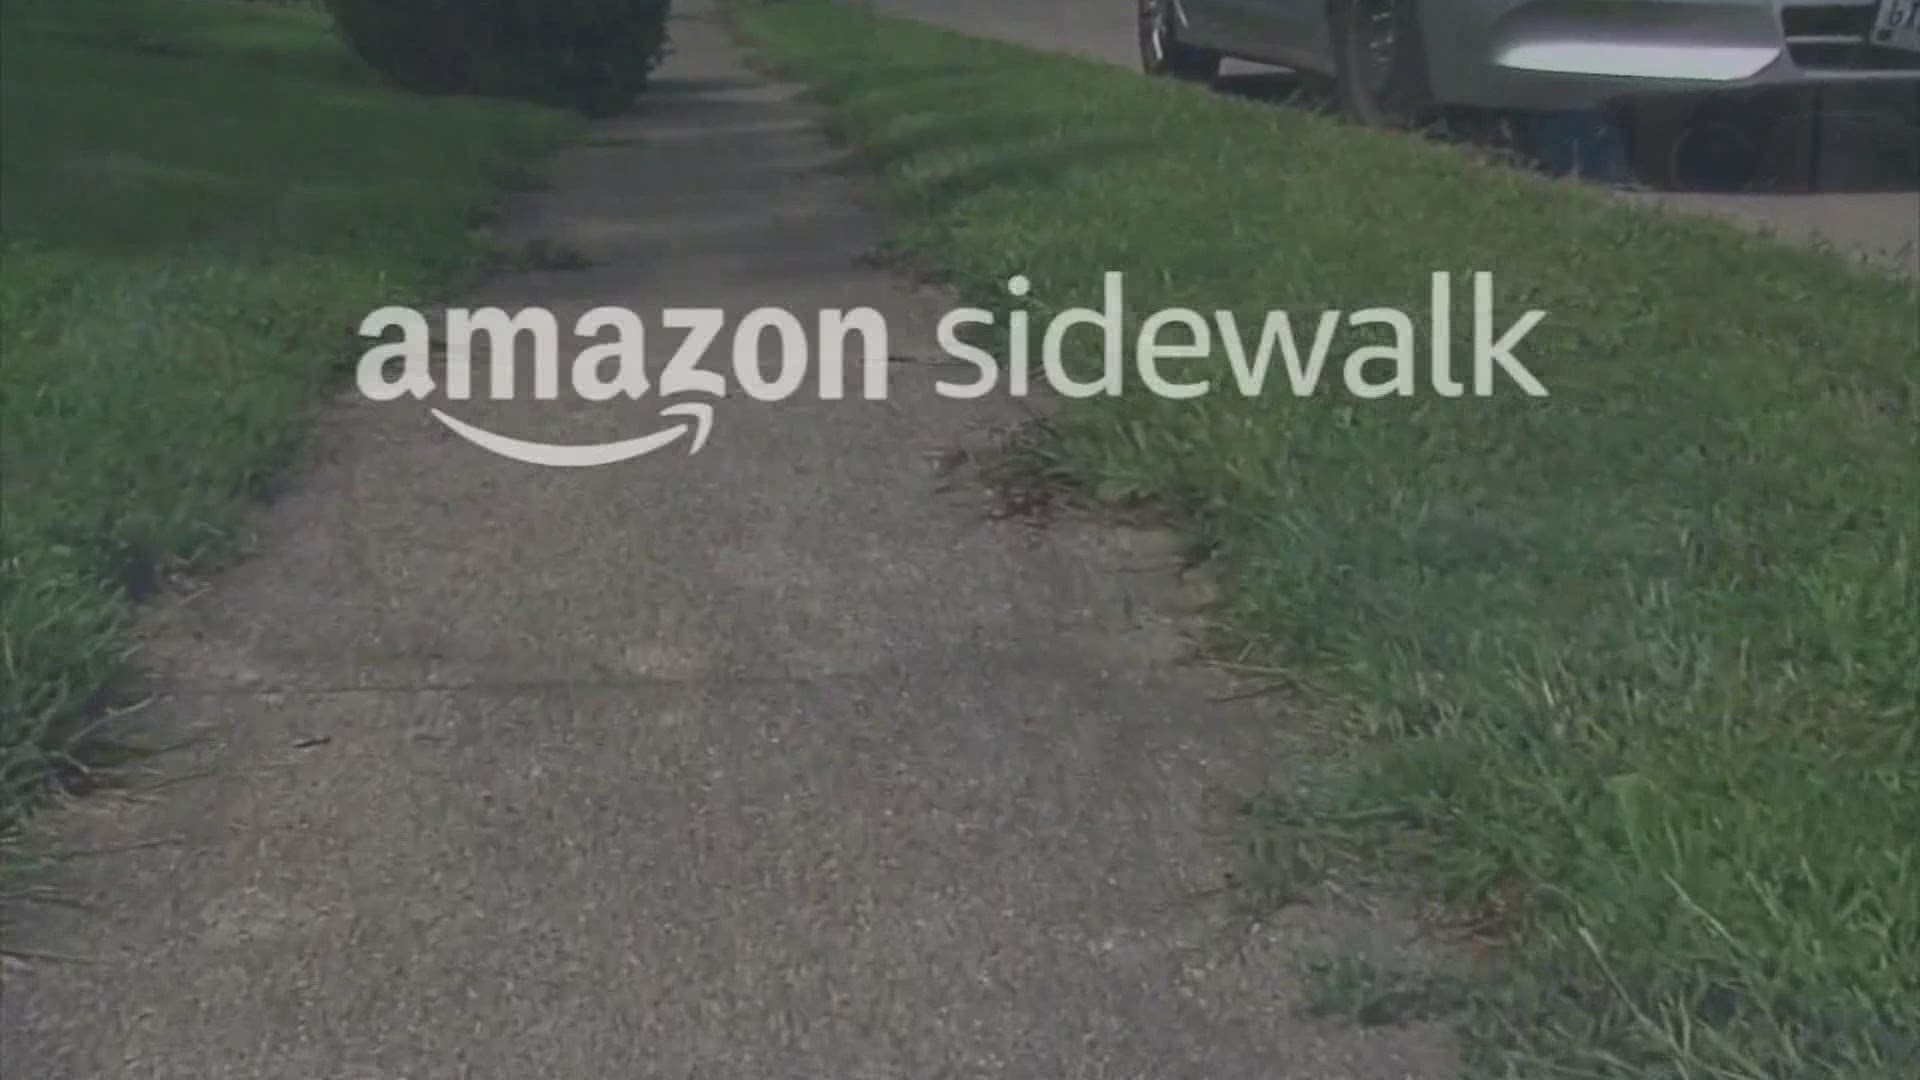 Amazon Sidewalk is scheduled to launch amid backlash over privacy and calls for people to opt out from some tech experts.